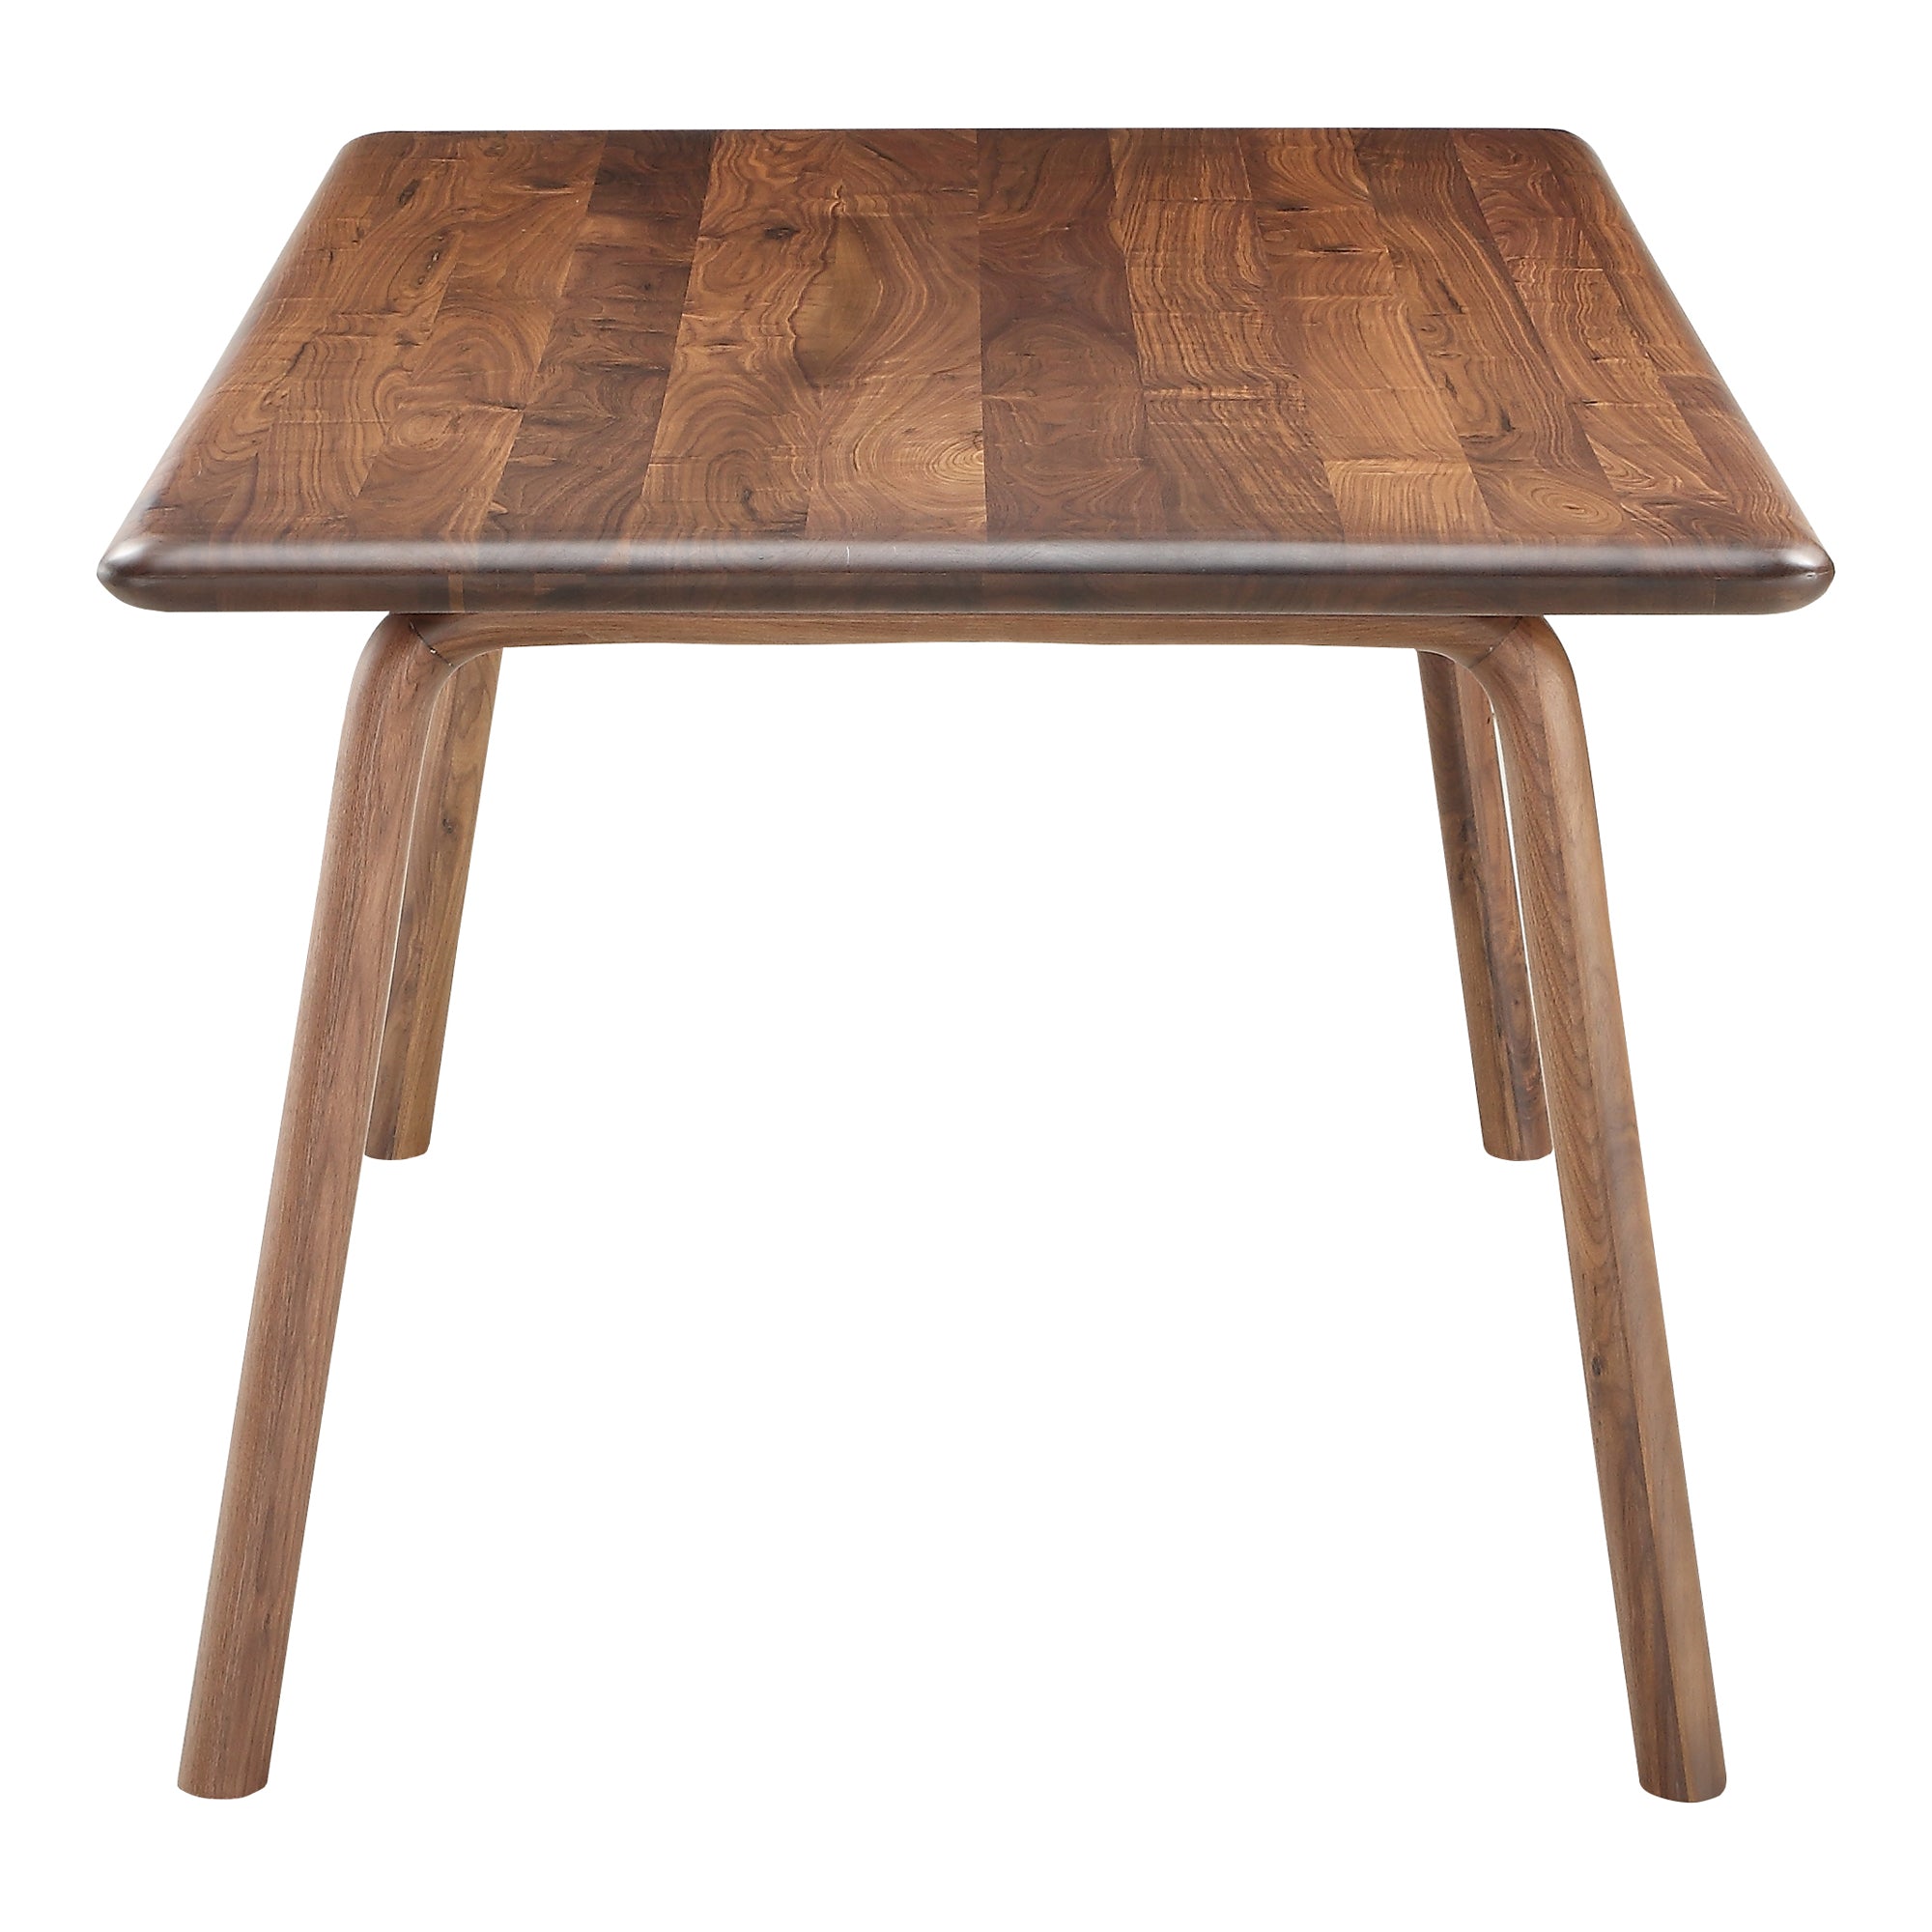 MOES-Malibu Dining Table-Dining Tables-MODTEMPO